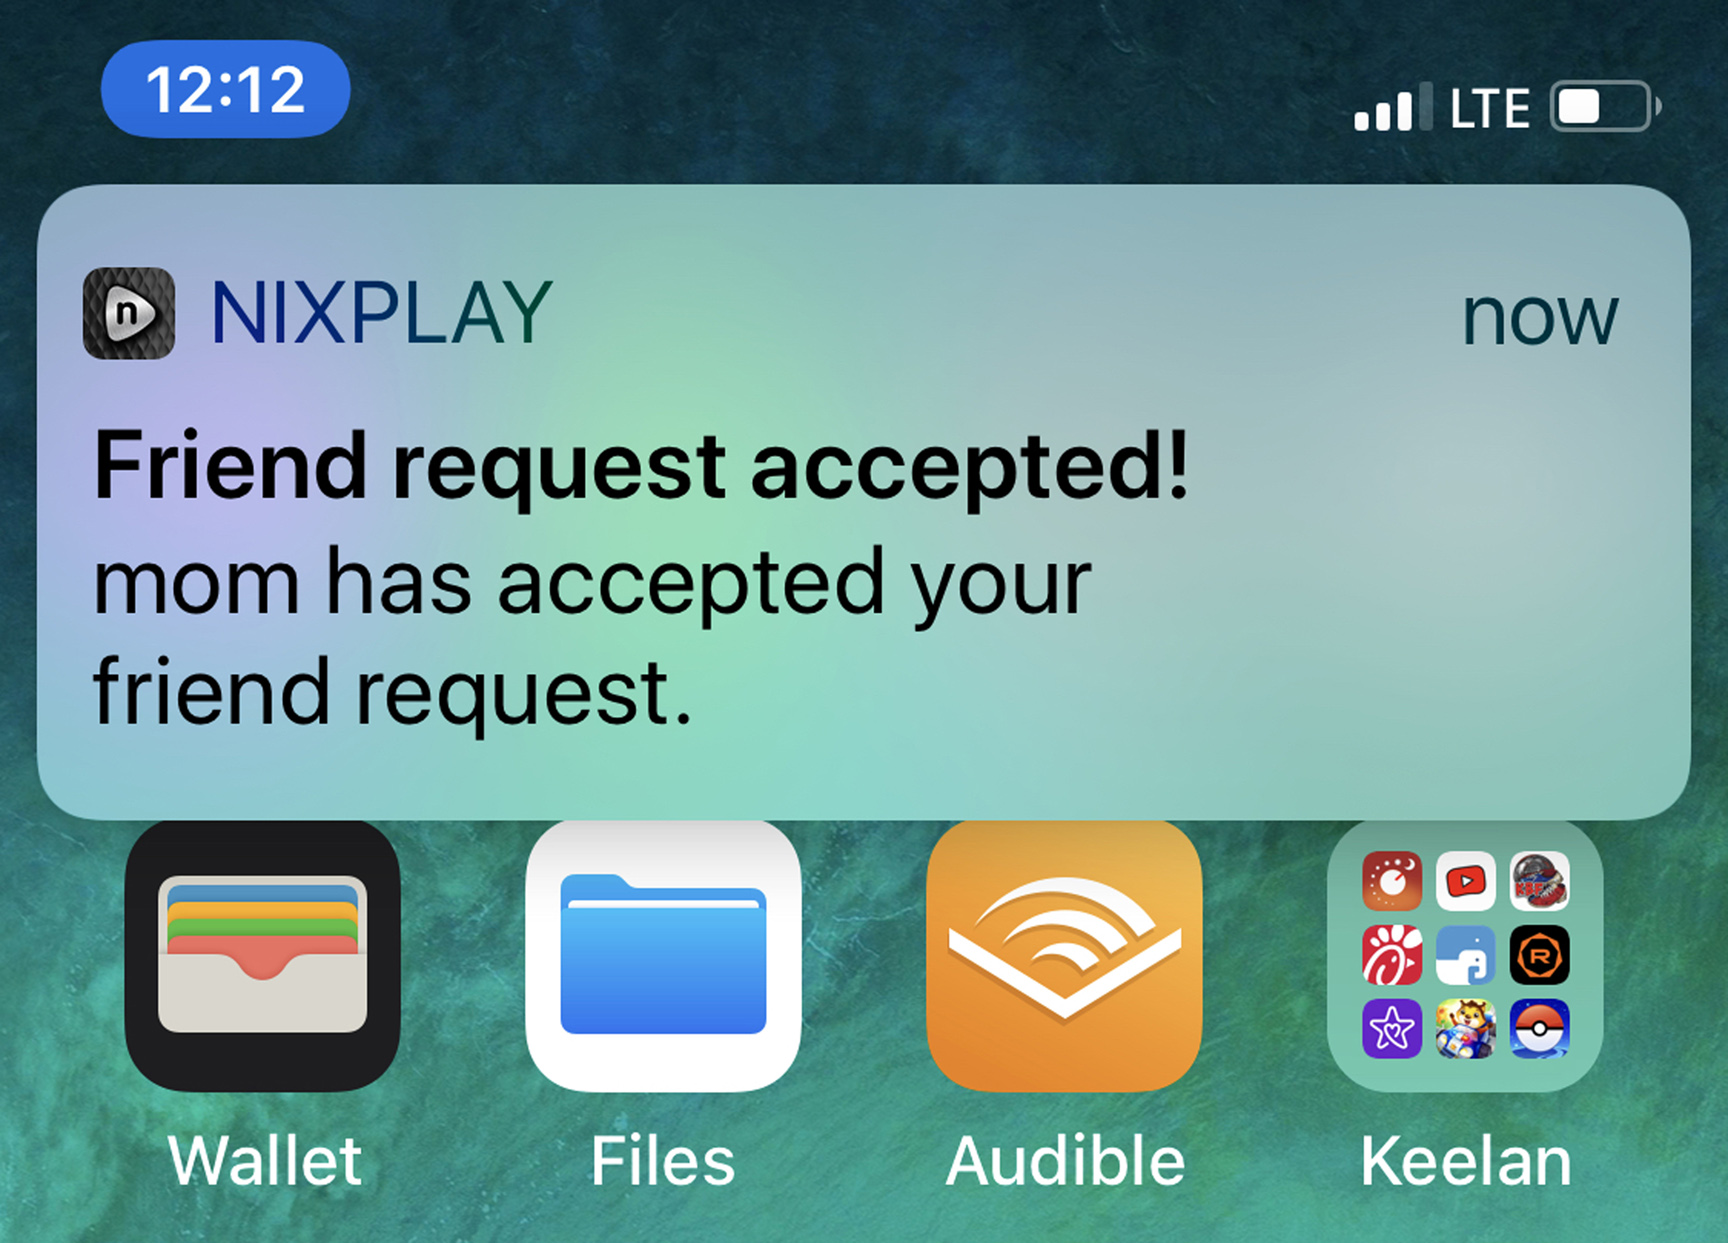 Friend request accepted on Nixplay